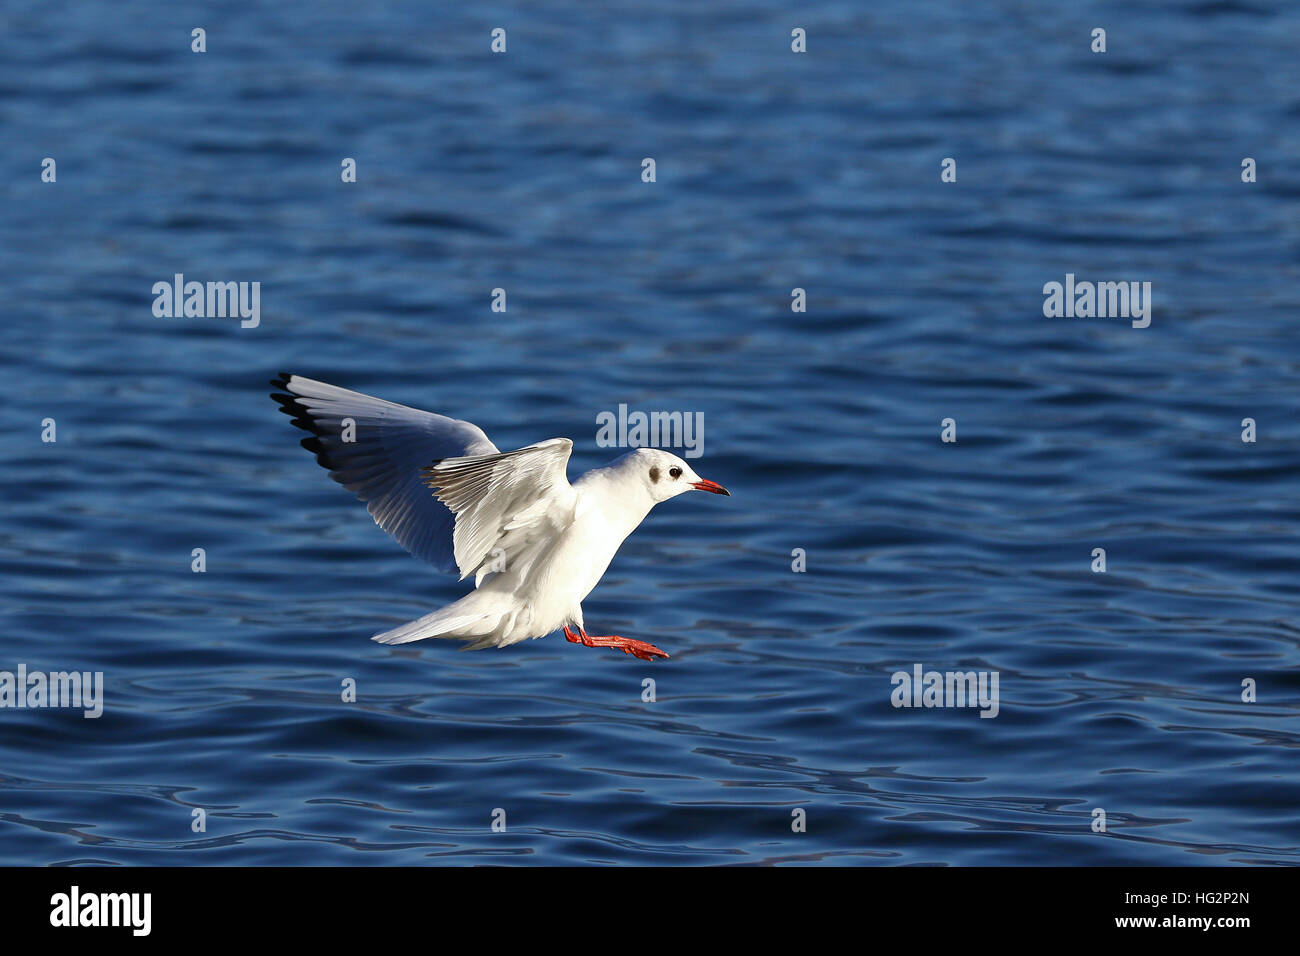 Common seagull in flight with open wings against blue water surface Stock Photo